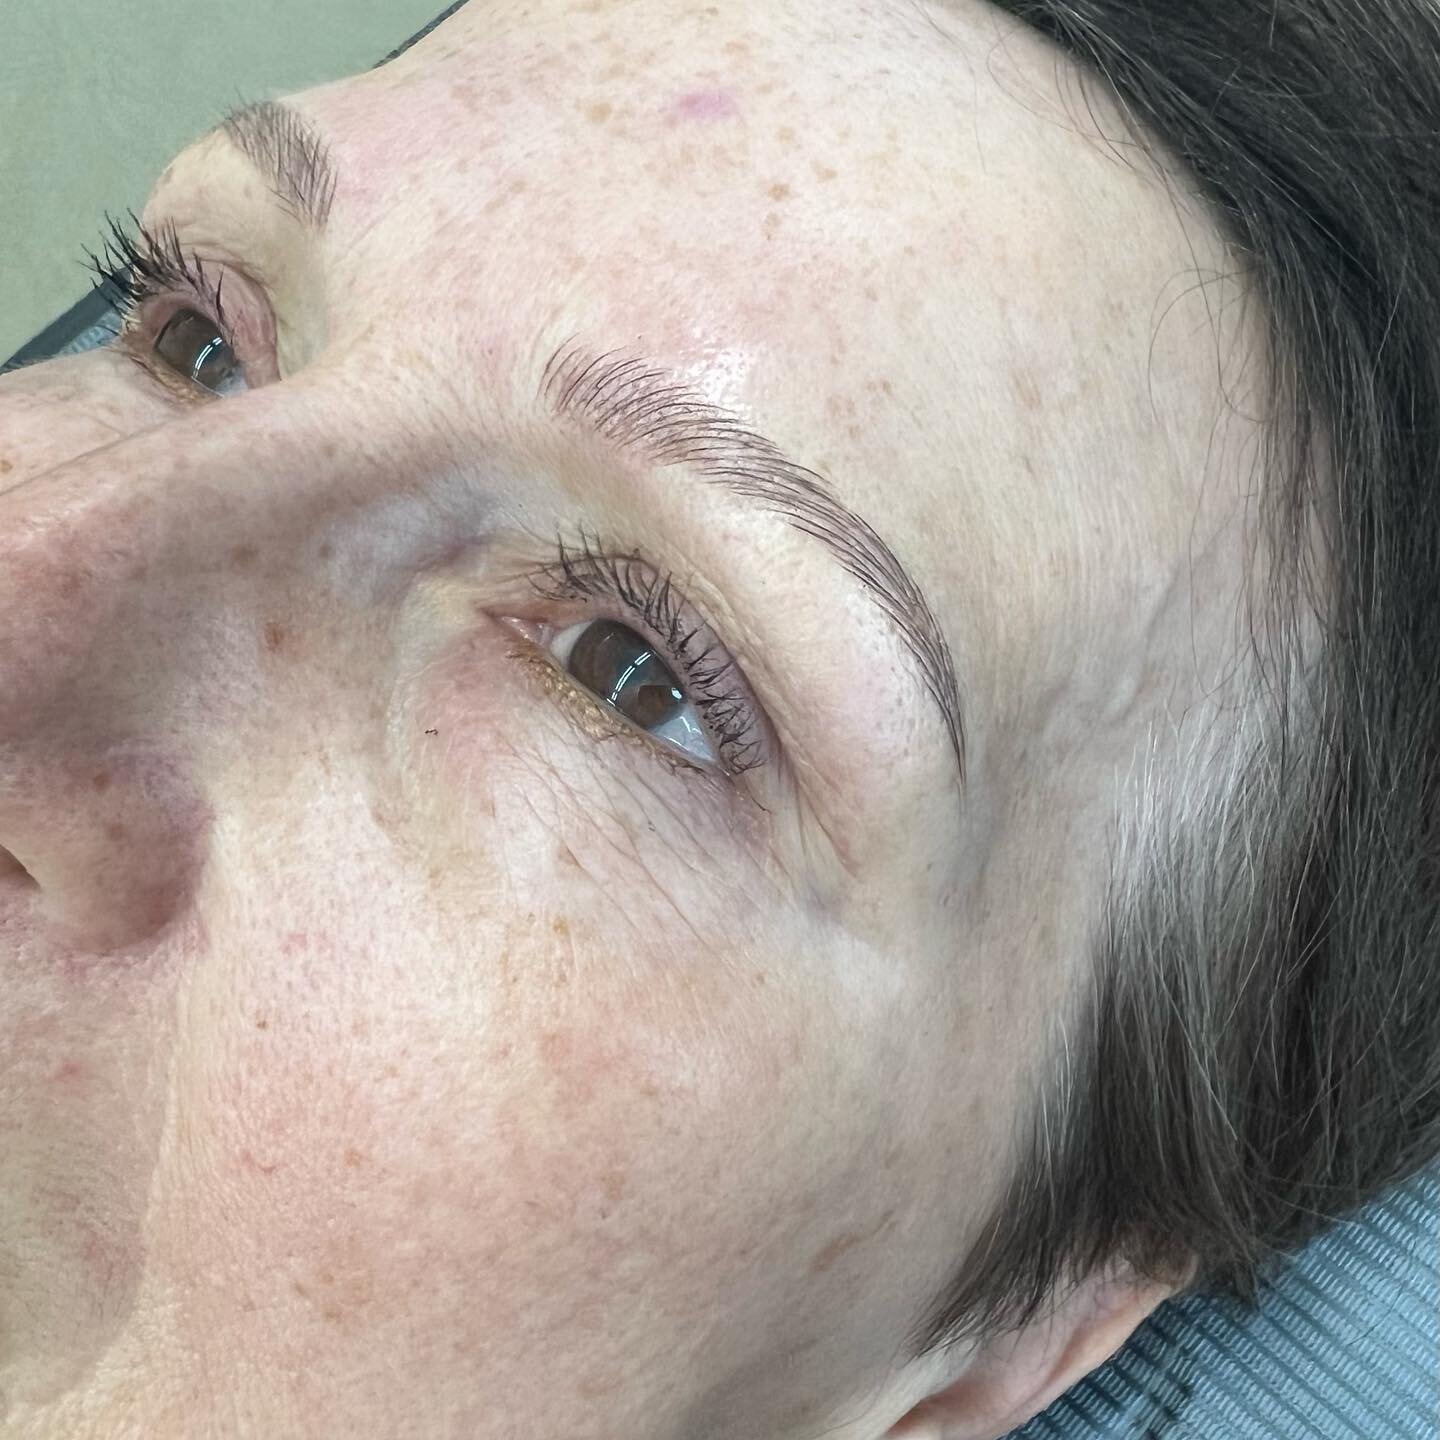 Swipe to see this life changing brow transformation &hearts;️
.
.
#browtransformation #microblading #pmu #pmuartist #microbladedbrows #browenvy #seattlemicroblading #olympiamicroblading #eyebrowmicroblading #browtattoo #waterproofbrows #habitbrows #b